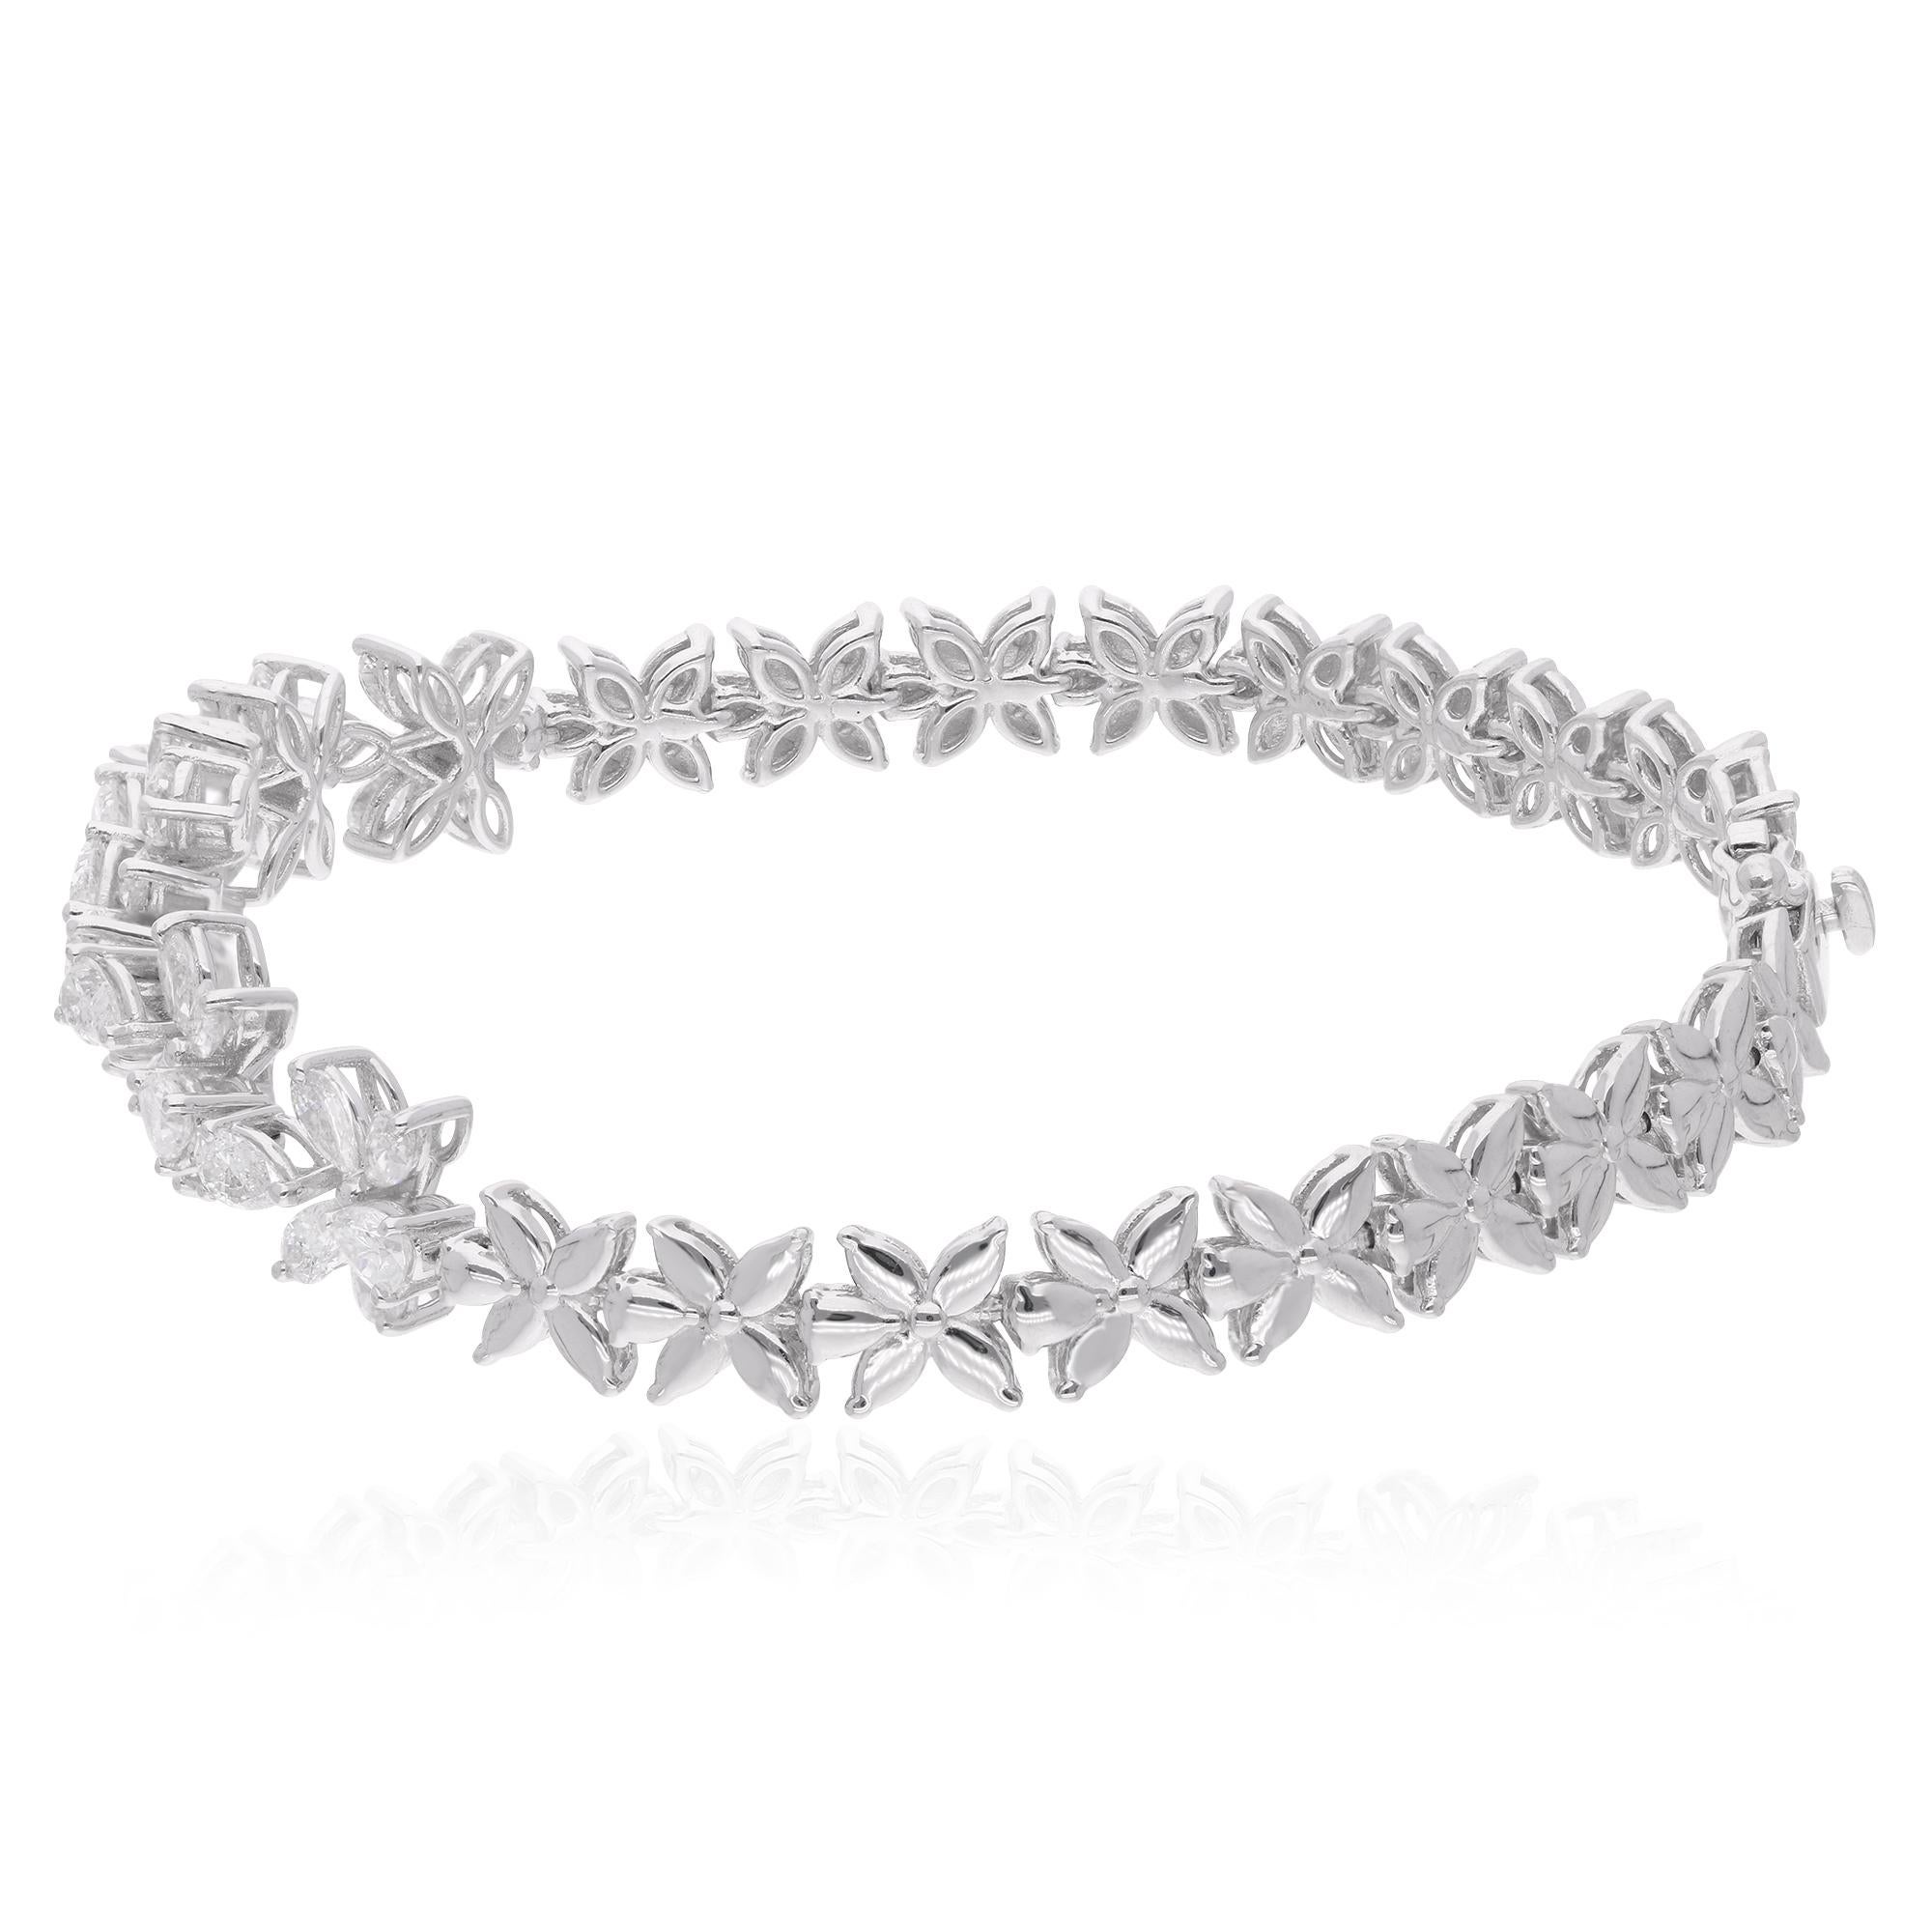 Item Code :- SEBR-43470
Gross Wt. :- 14.28 gm
18k White Gold Wt. :- 13.61 gm
Natural Diamond Wt. :- 3.36 Ct. (AVERAGE DIAMOND CLARITY SI1-SI2 AND COLOR H-I)
Bracelet Length :- 7 Inches Long

✦ Sizing
.....................
We can adjust most items to